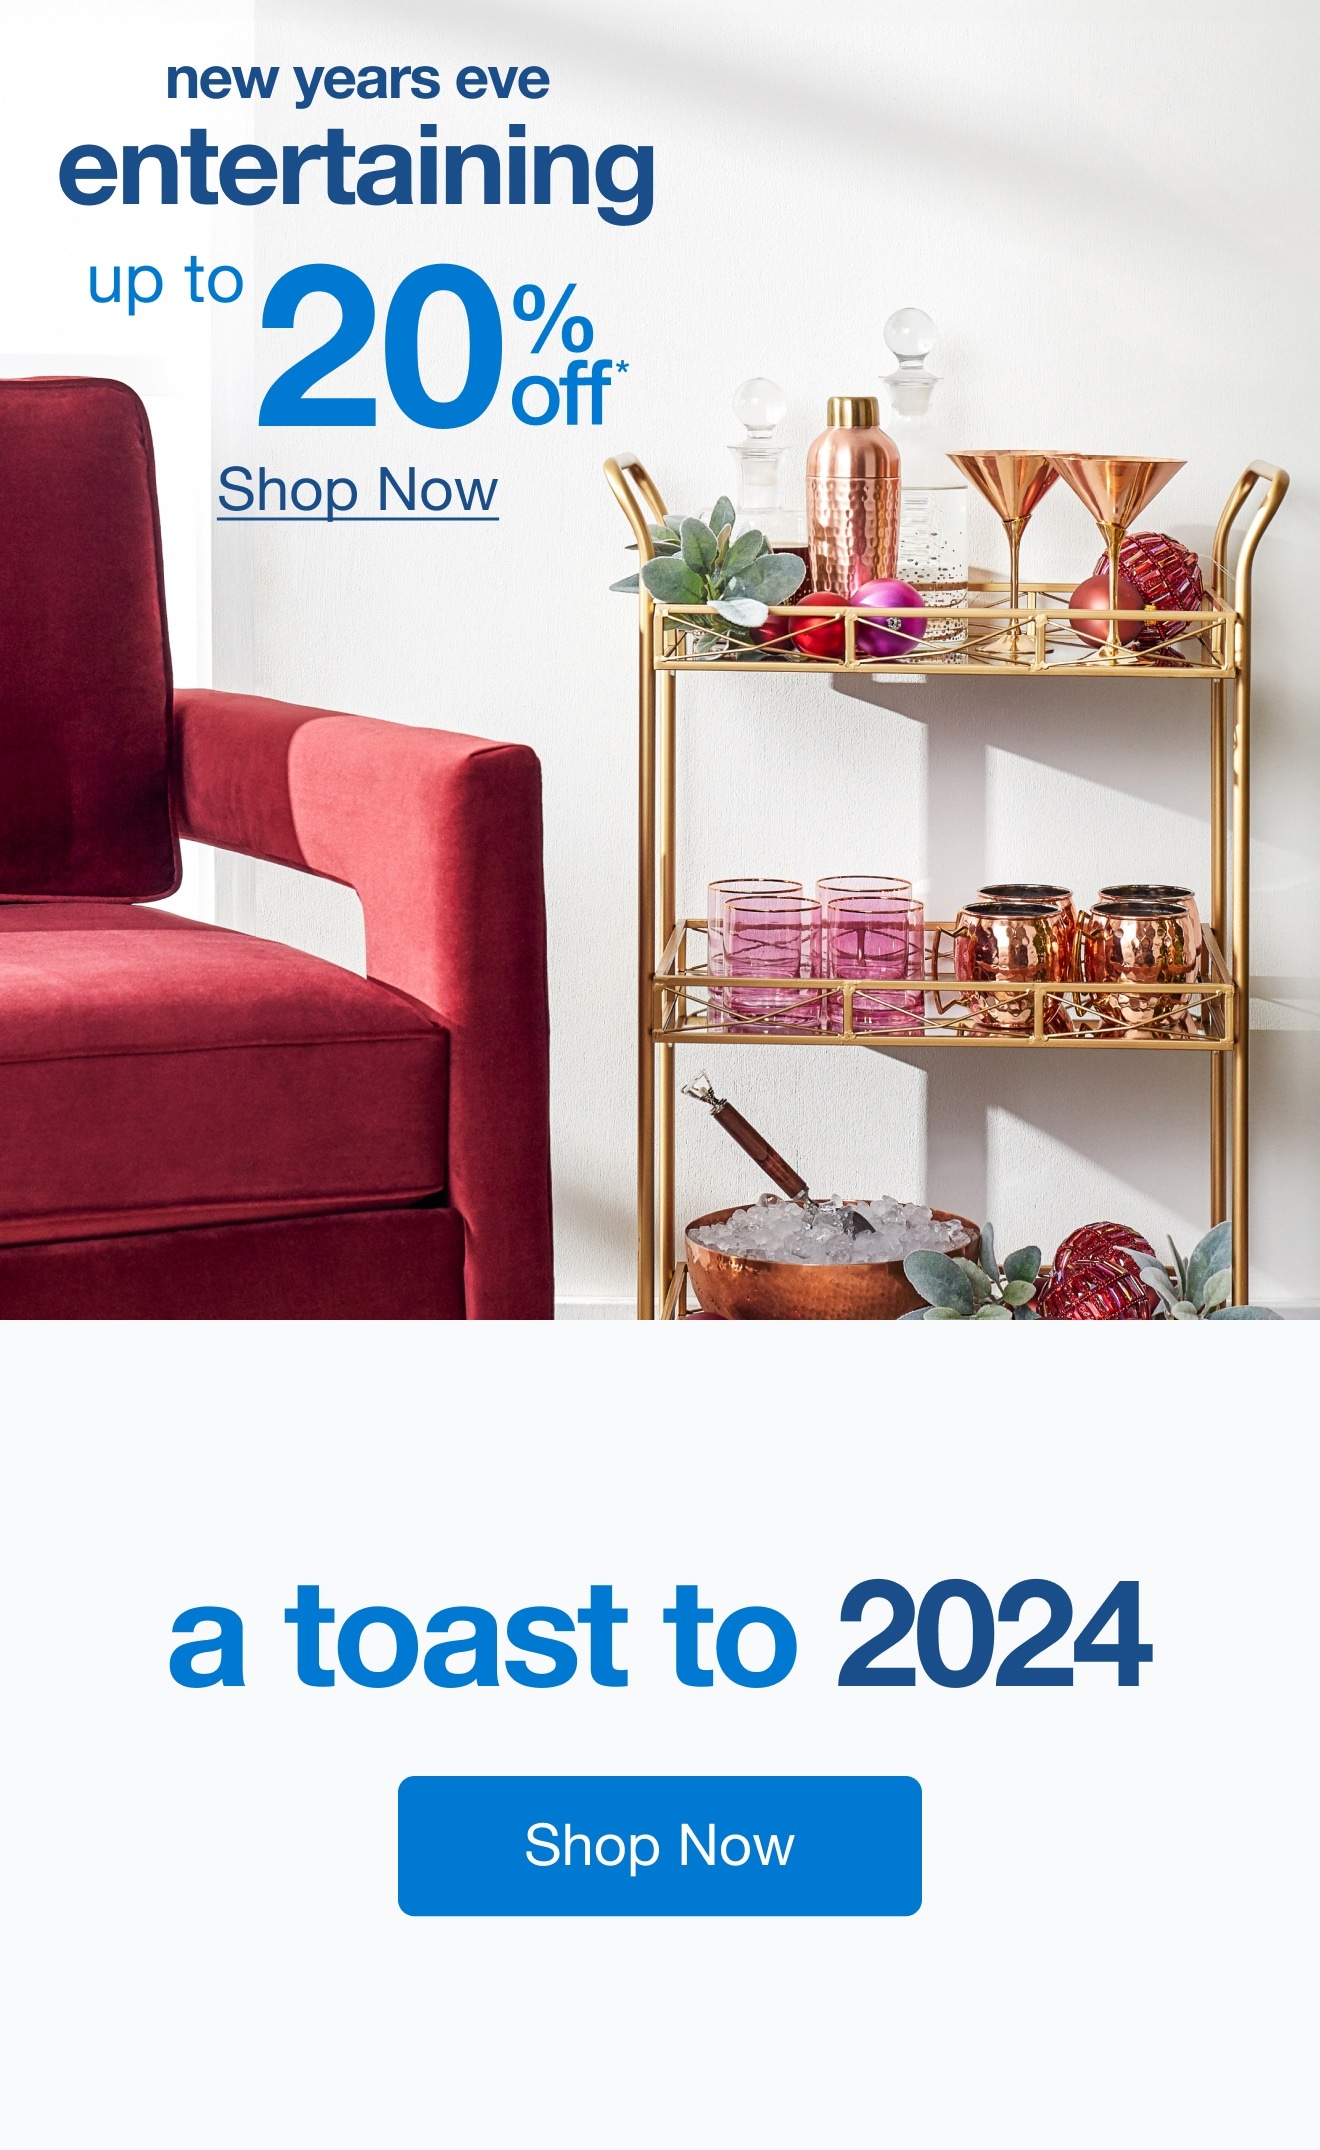 Up to 20% Off* New Years Eve Entertaining — Shop Now!